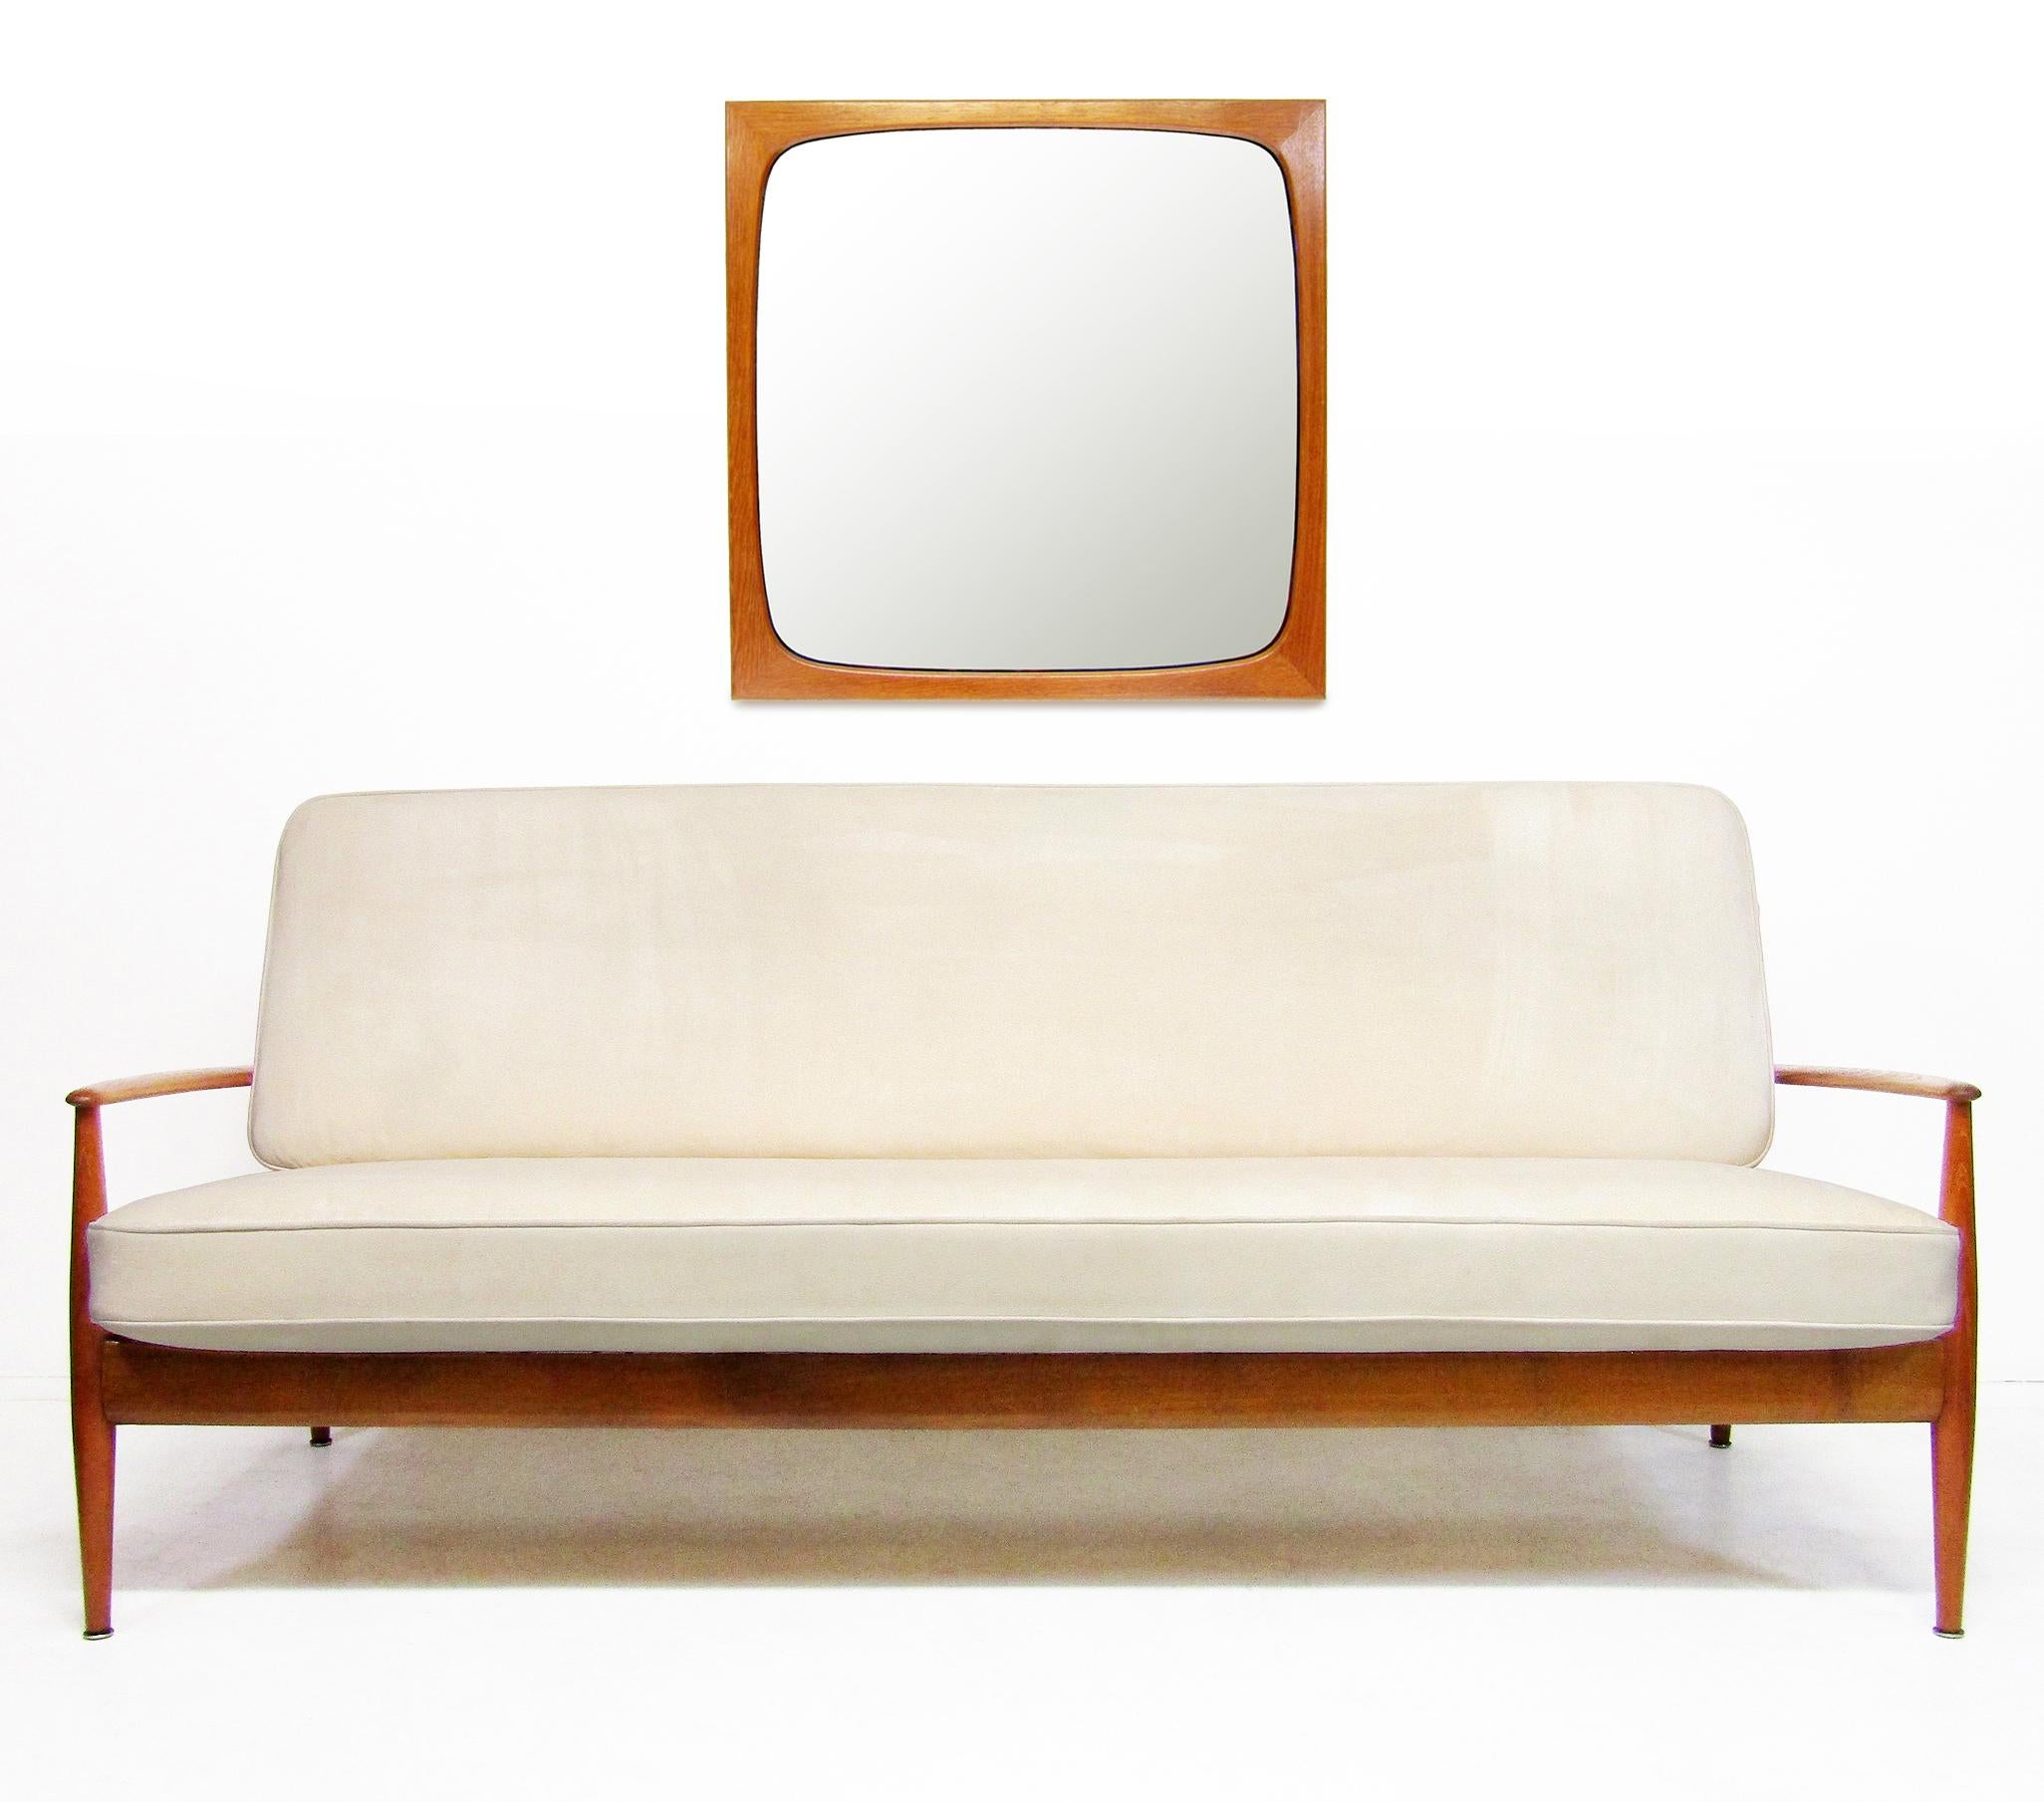 A sleek 1960s mirror in teak by Danish maker Aksel Kjersgaard.

The sculpted contours of this mirror show quality typical of the maker and the period. 

It is in excellent, clean condition, with barely any signs of age. It would suit any modern